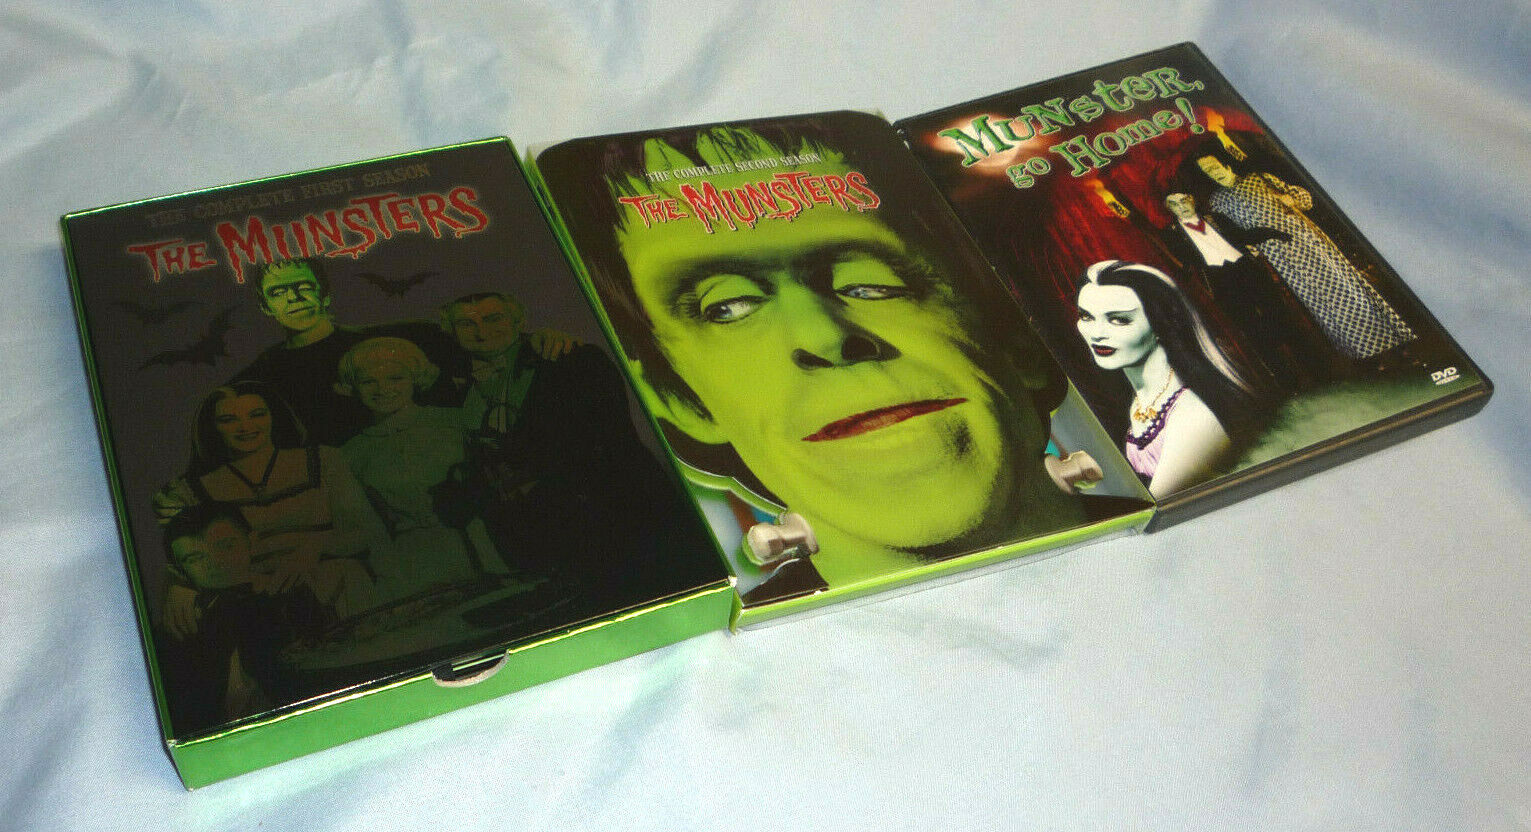 THE MUNSTERS Complete Series (Seasons 1 and 2) & MUNSTER GO HOME DVDs LIKE NEW!